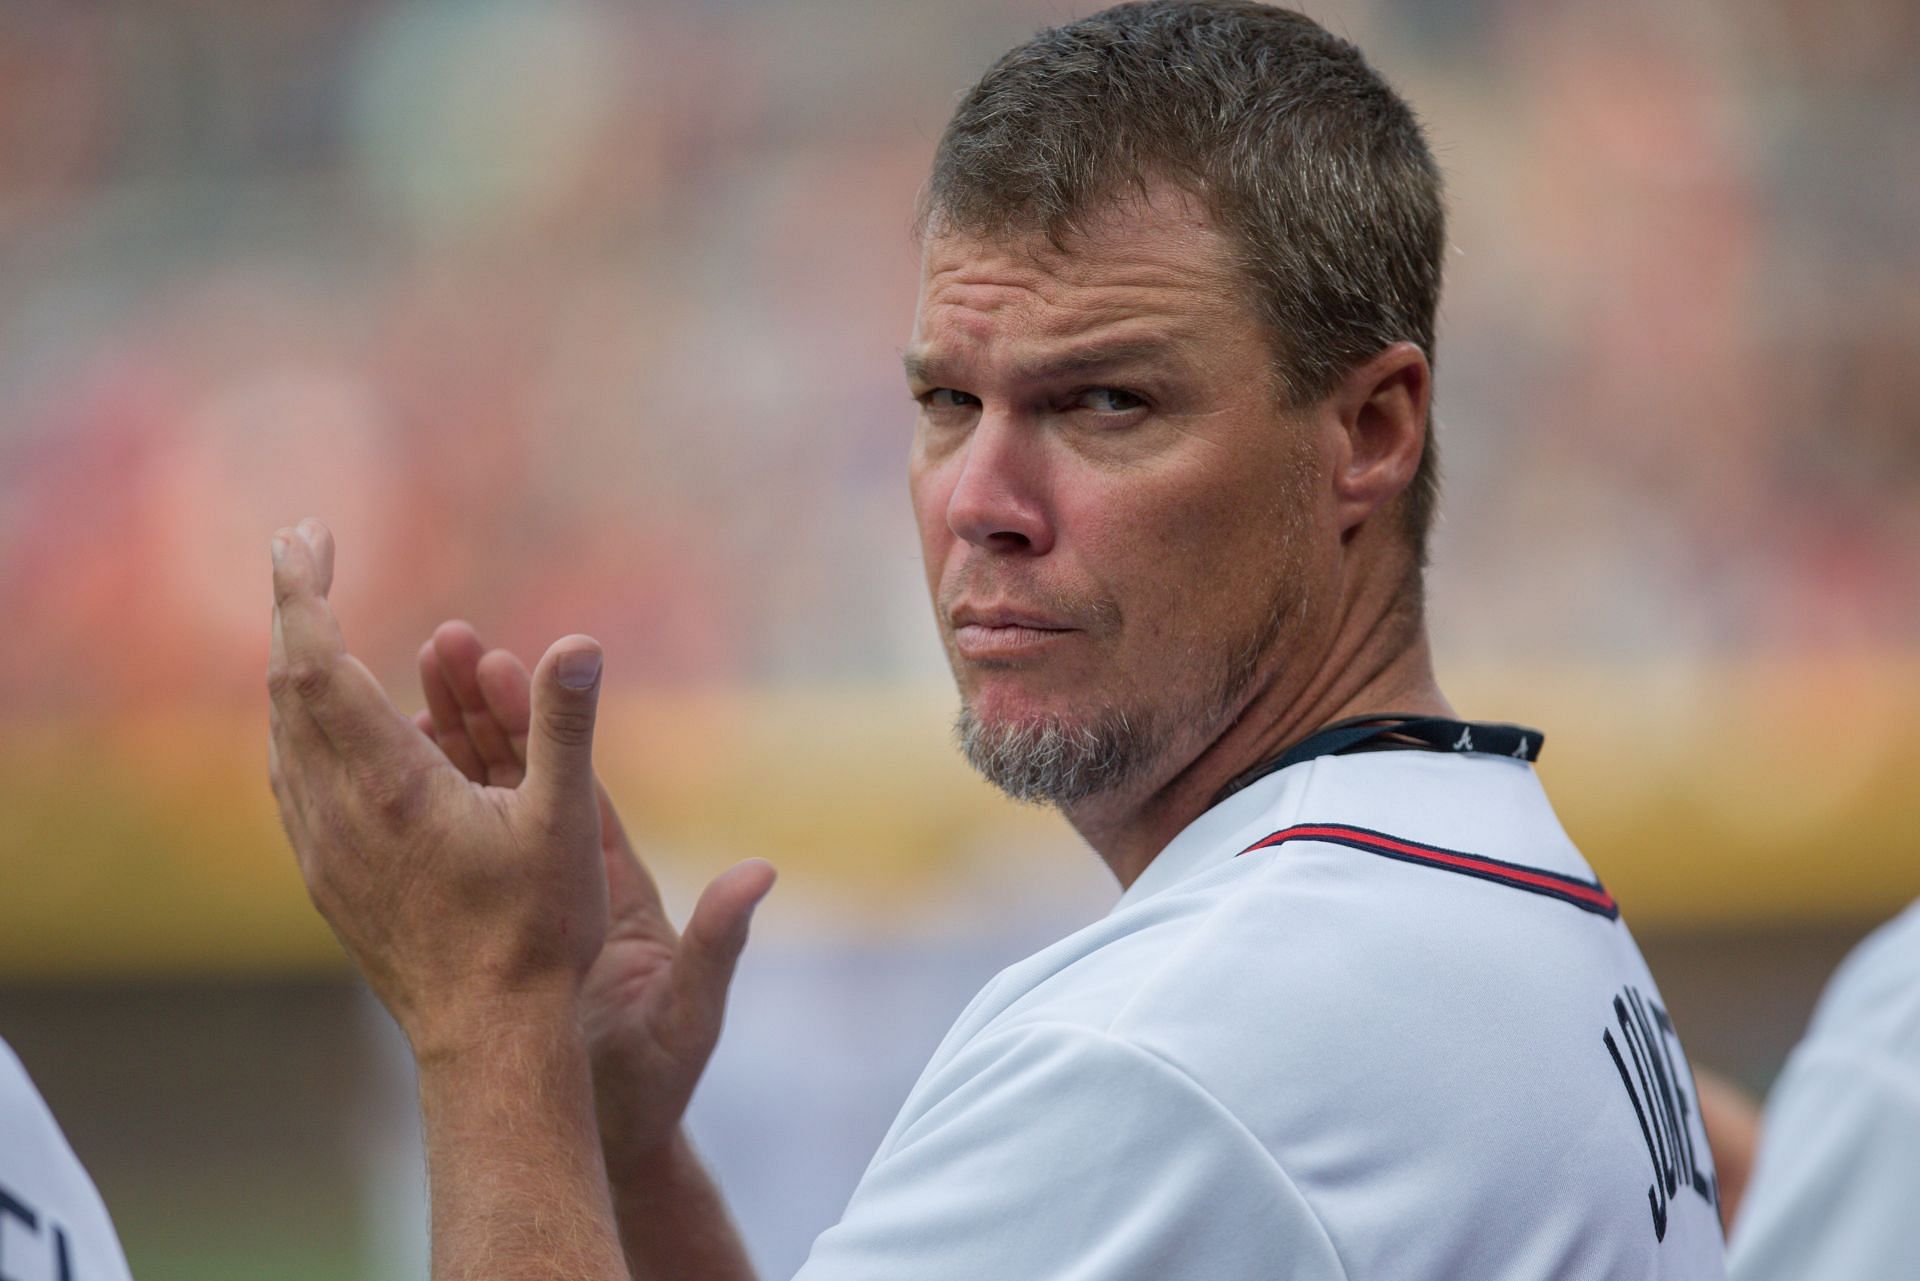 Hall of Fame: Chipper Jones, pregnant wife make it through ceremony